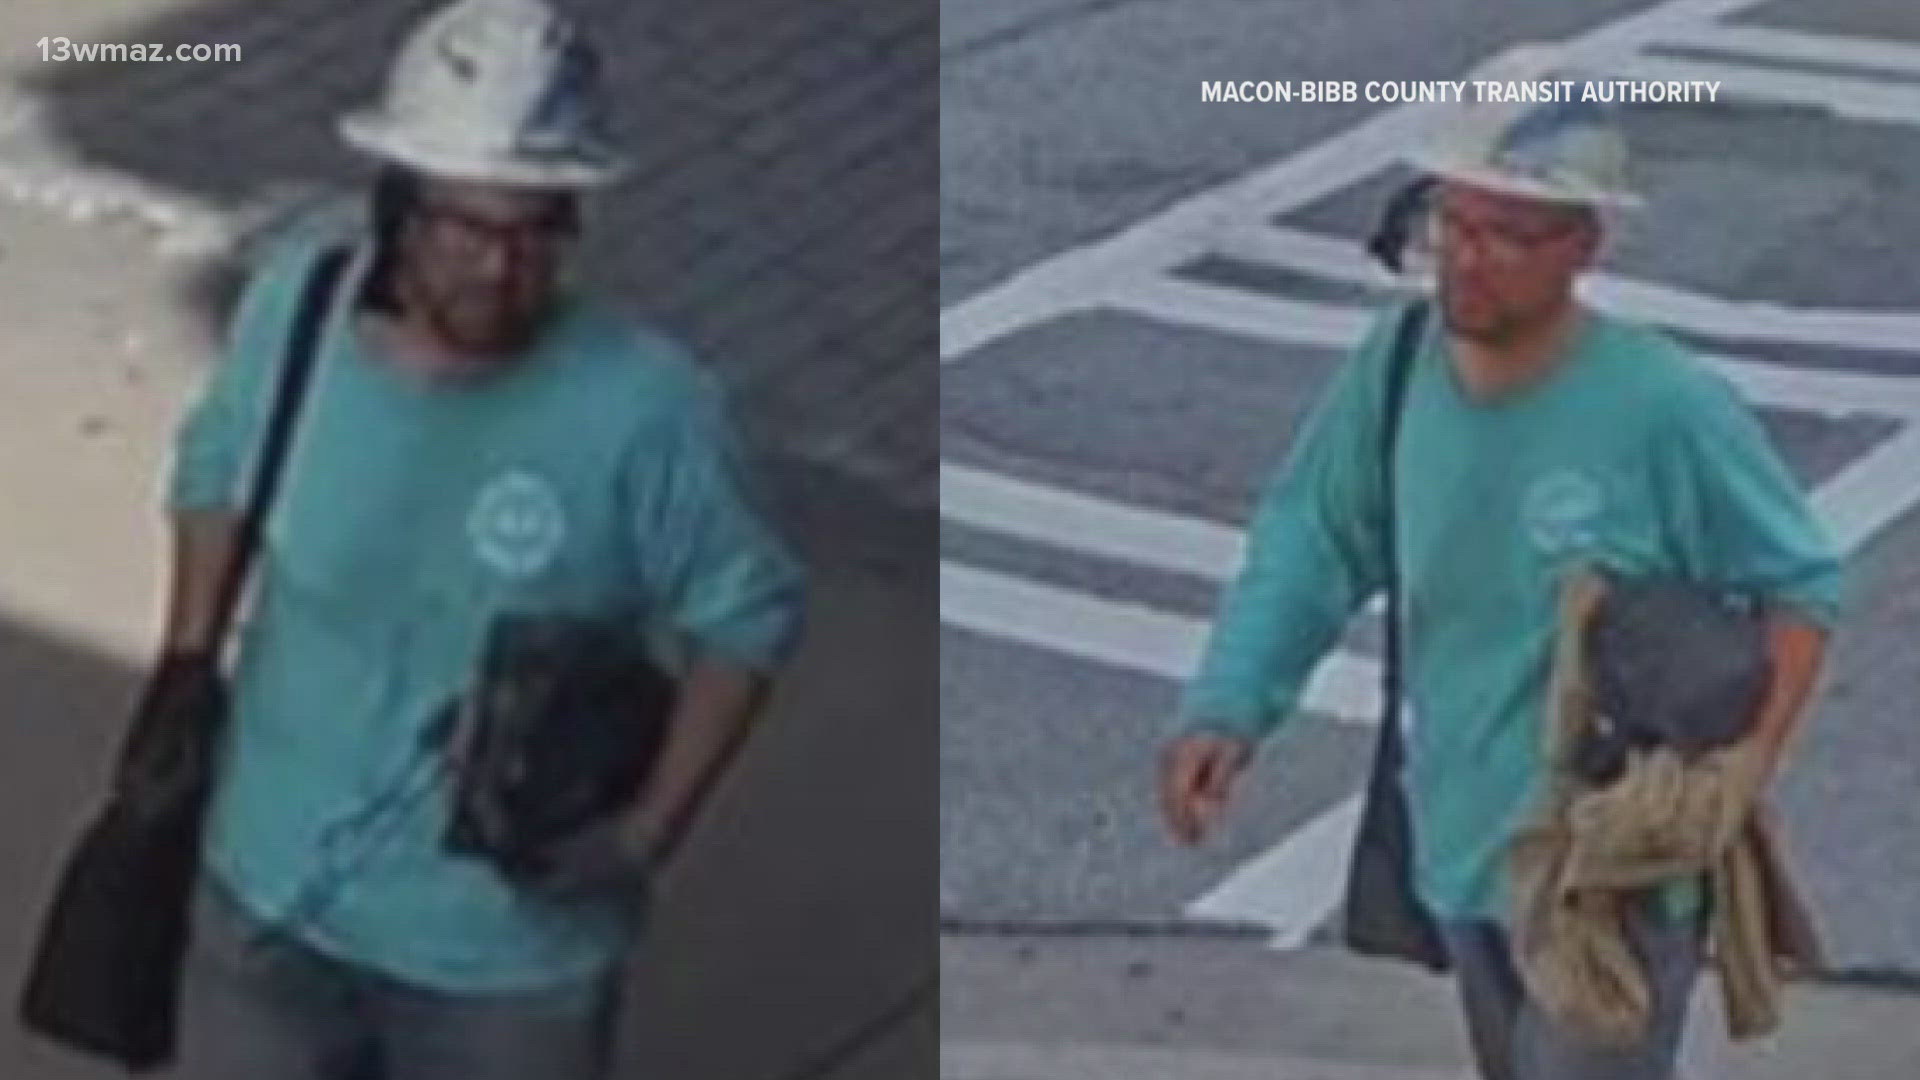 The sheriff's office says the newly-released images were taken on the same day Albert Knight was killed while sleeping in a downtown Macon alley.